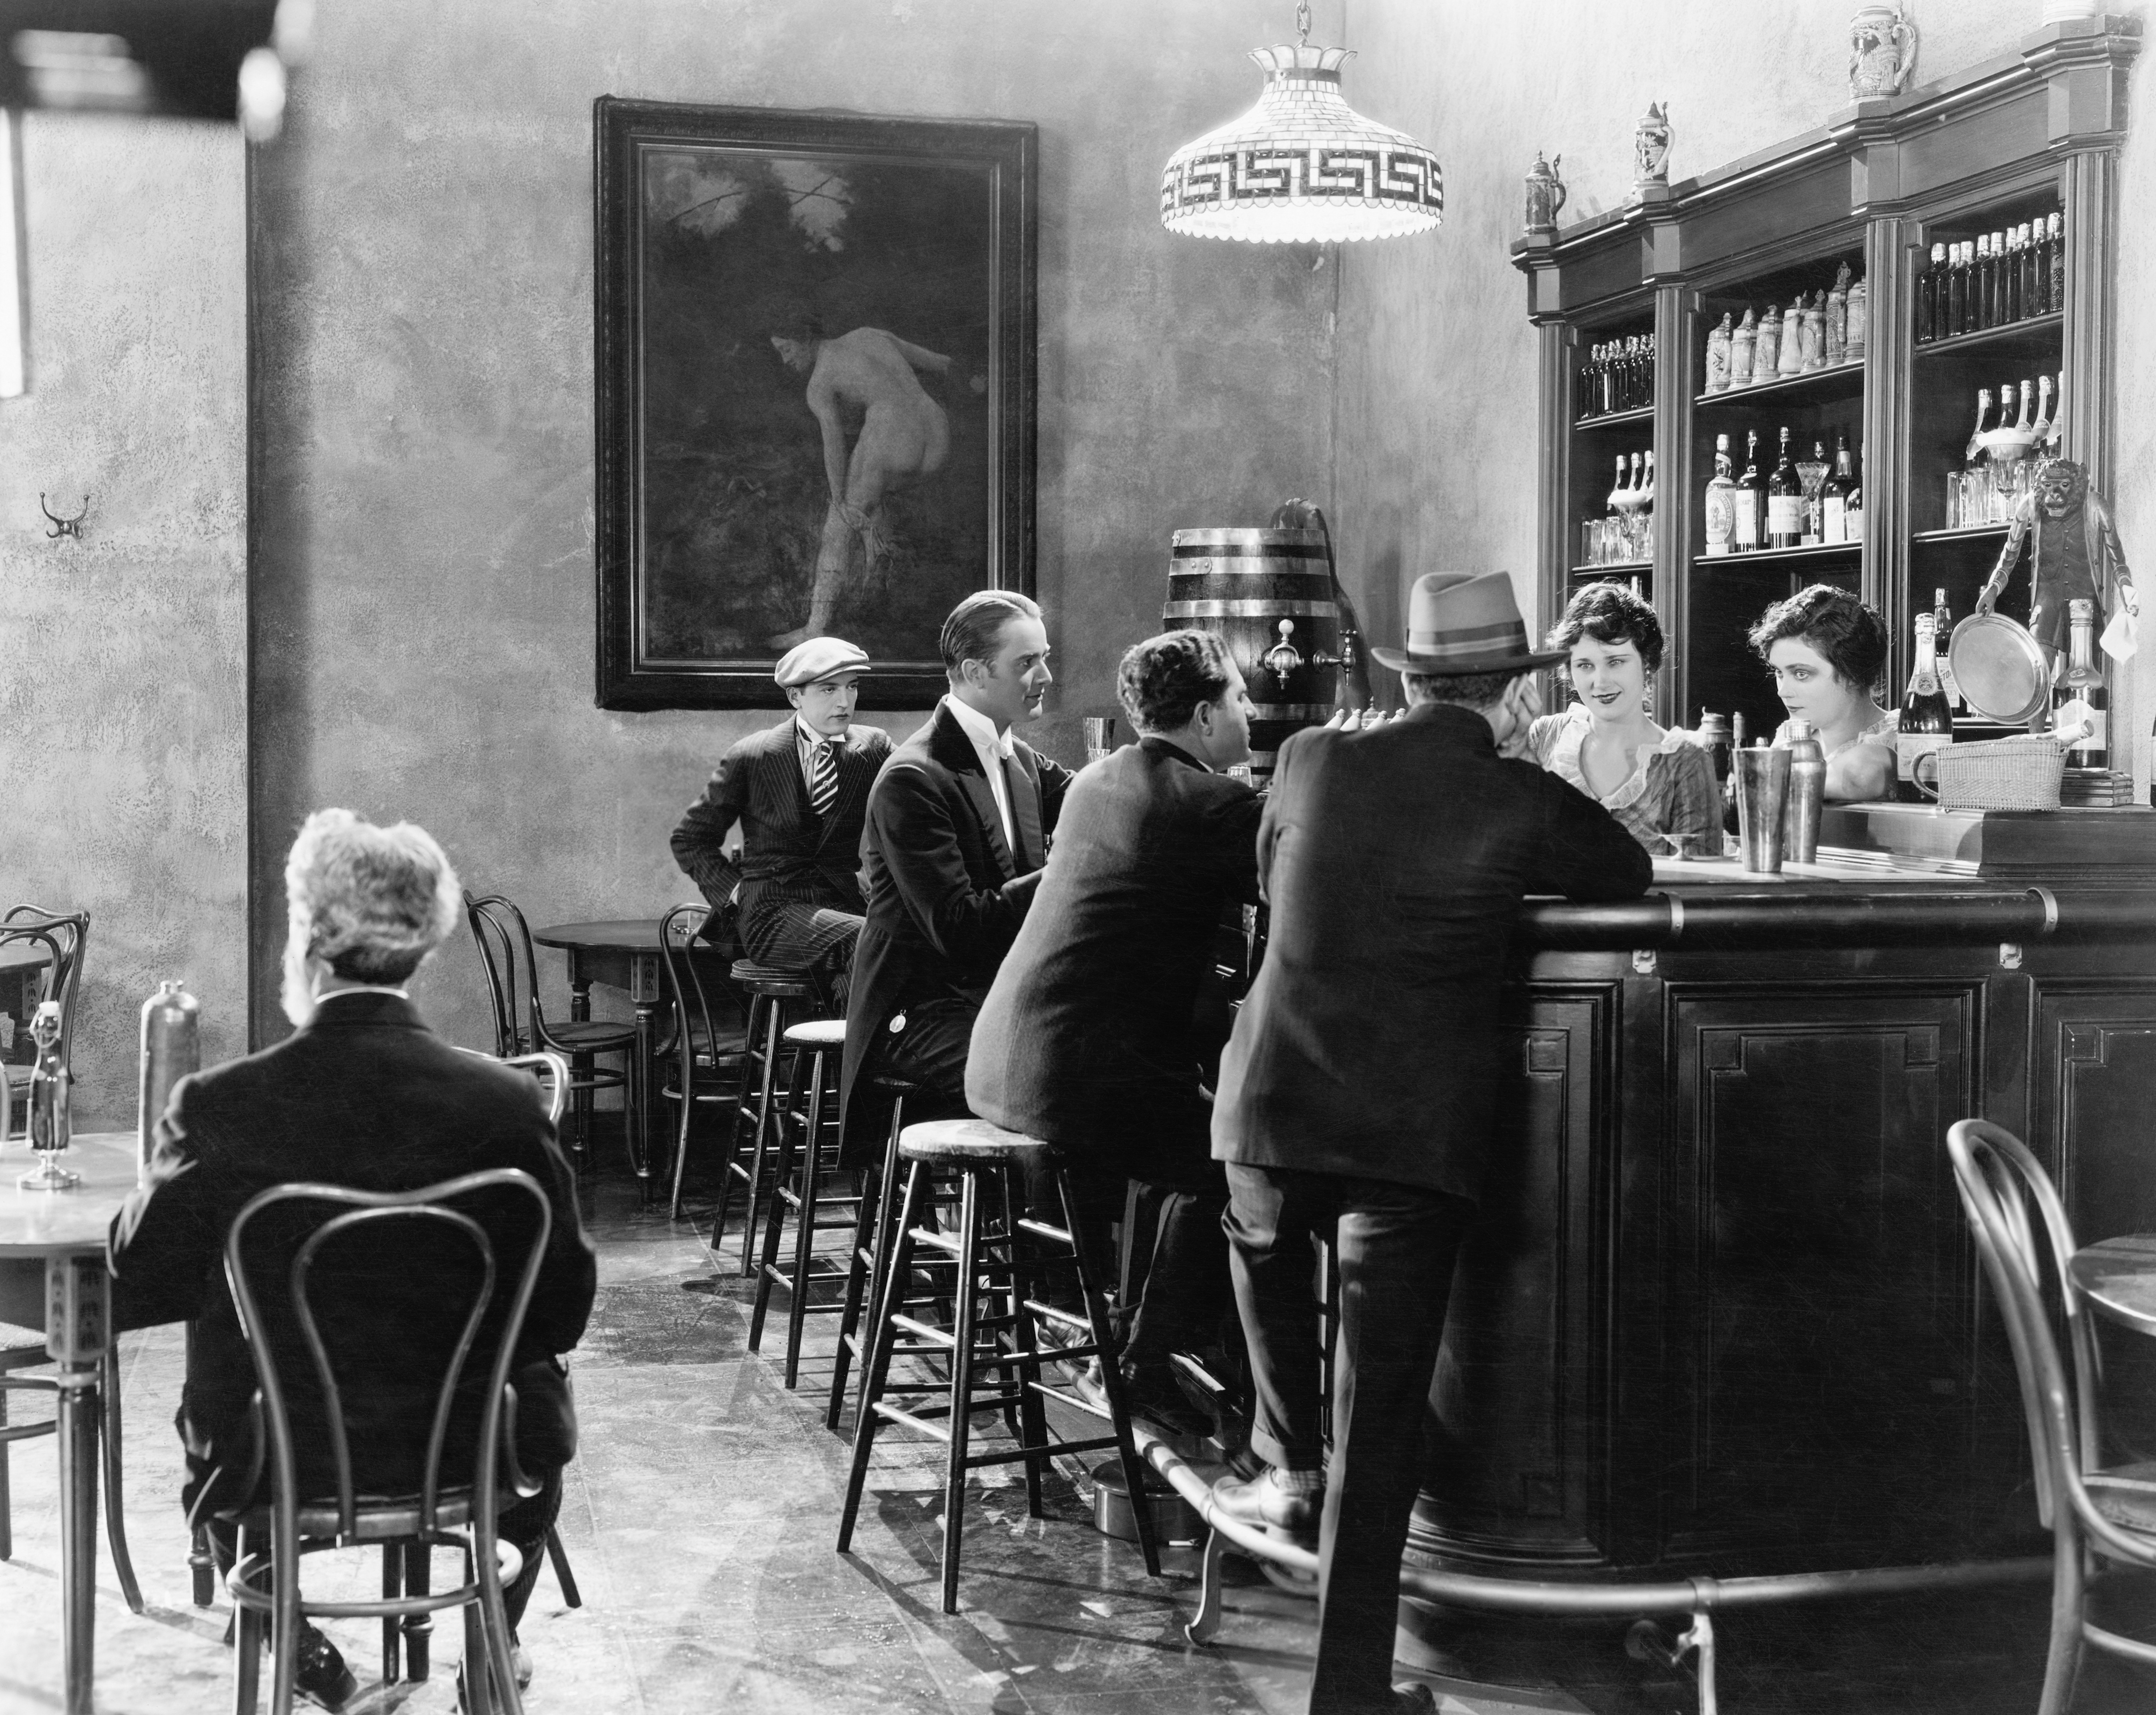 Men gathered around a bar with women bartenders